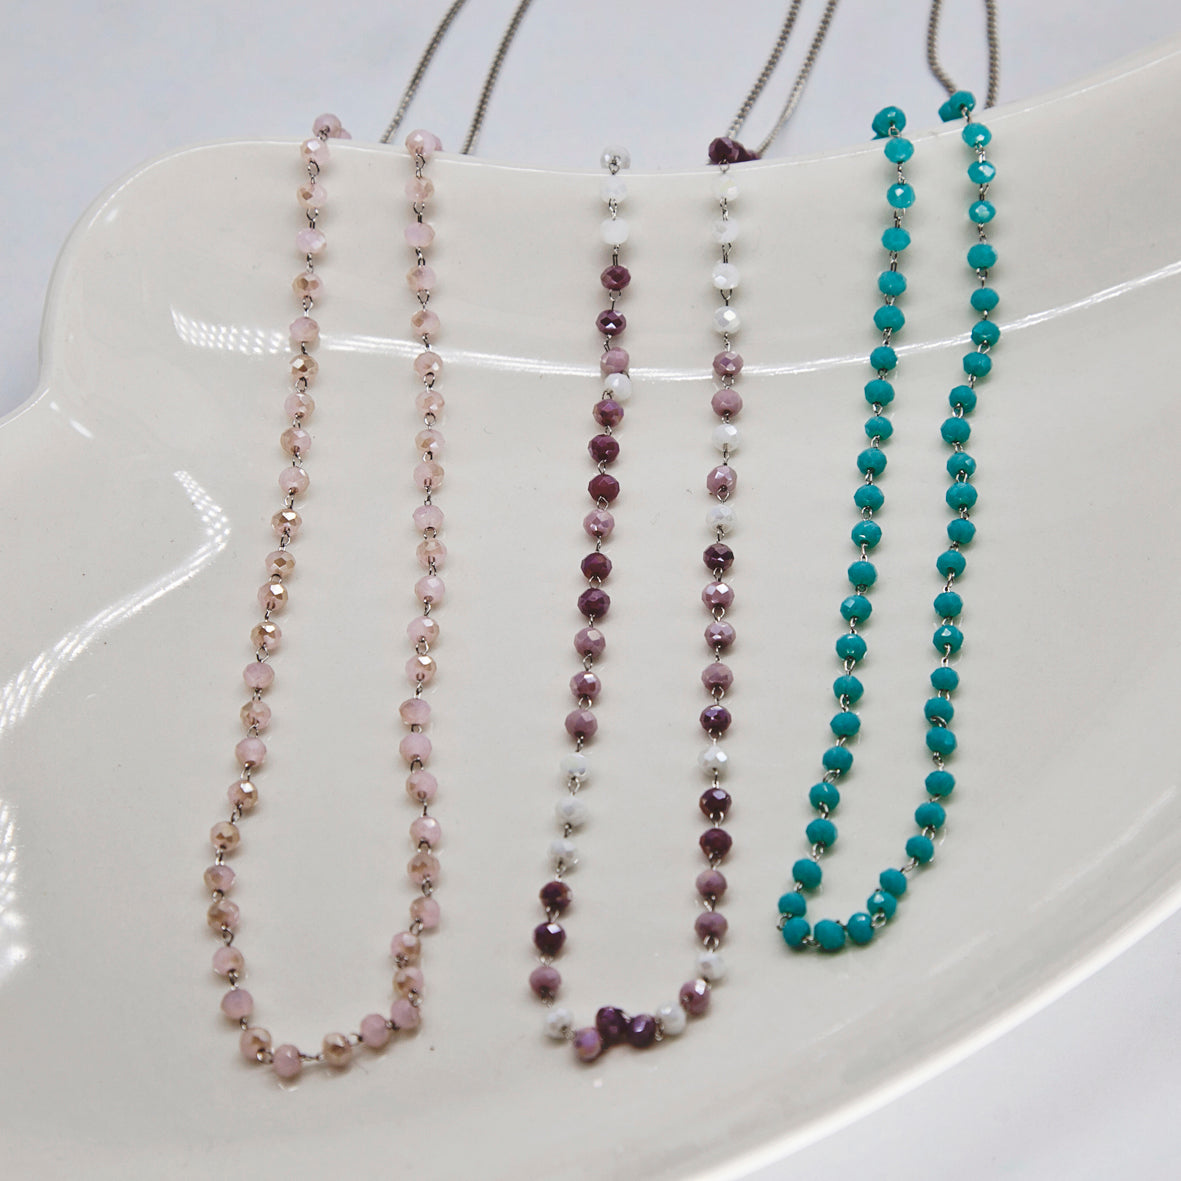 Delicate Crystal Bead Necklace - Shades of Mauve and Purple